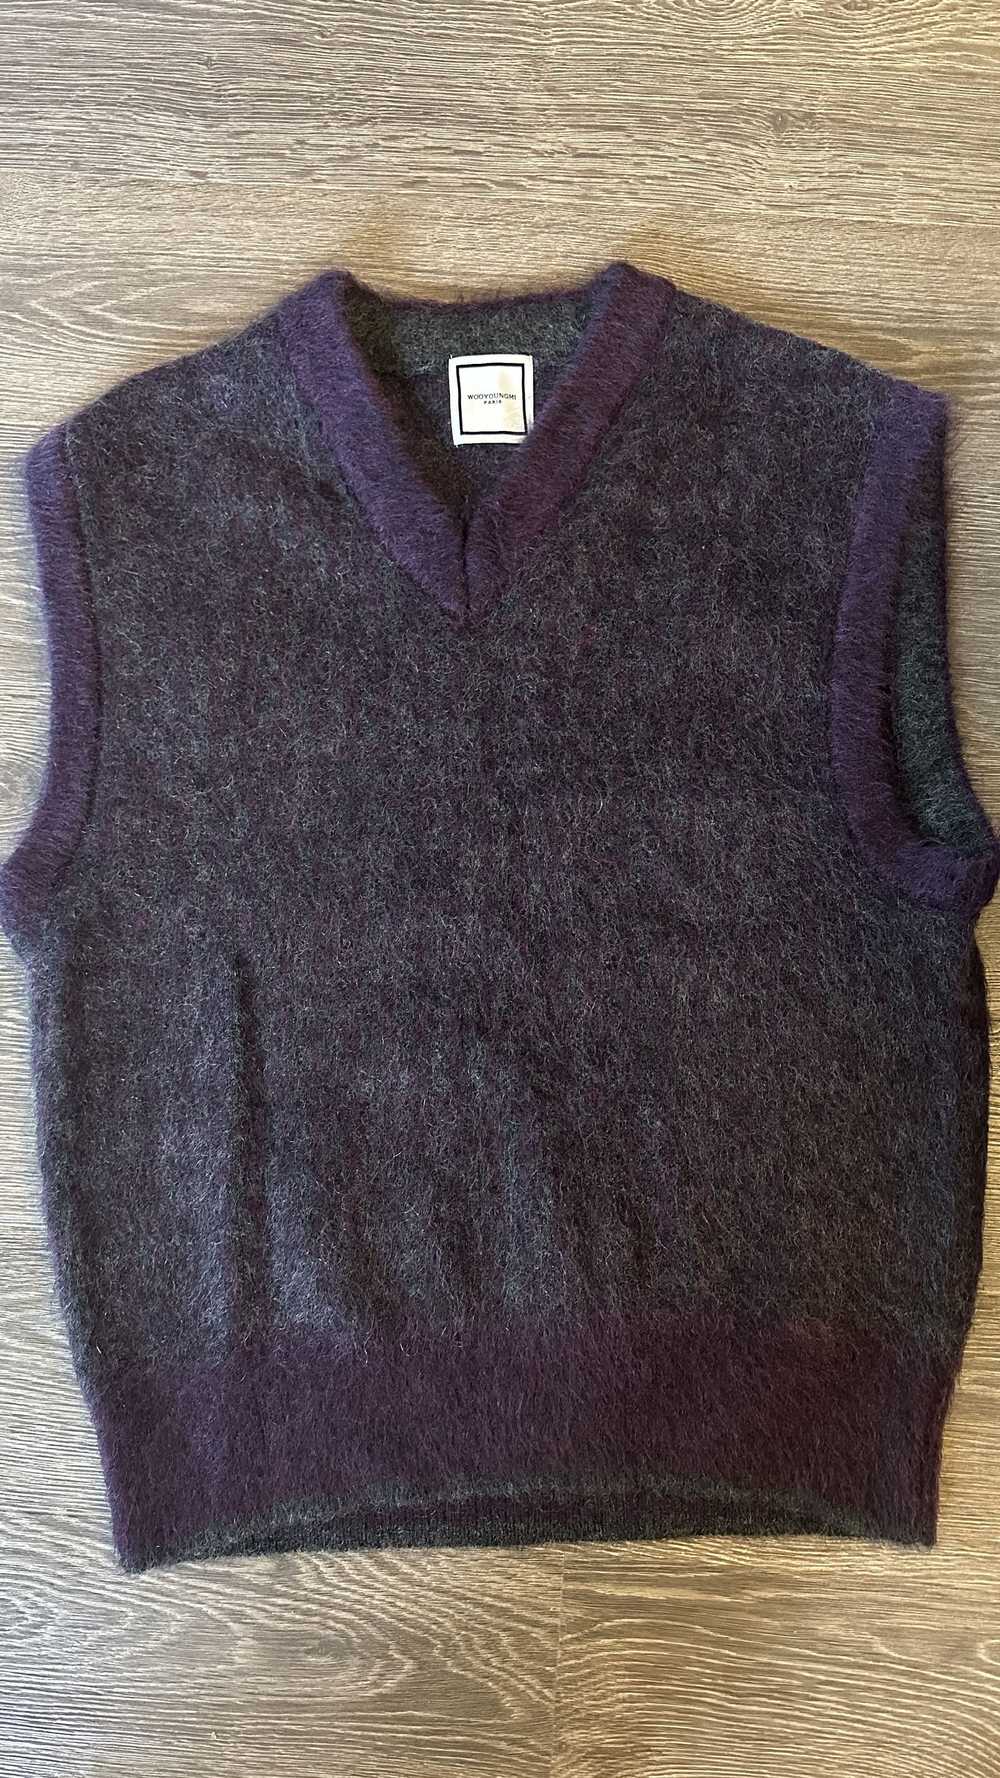 Wooyoungmi Wooyoungmi Mohair V-Neck Vest - image 1